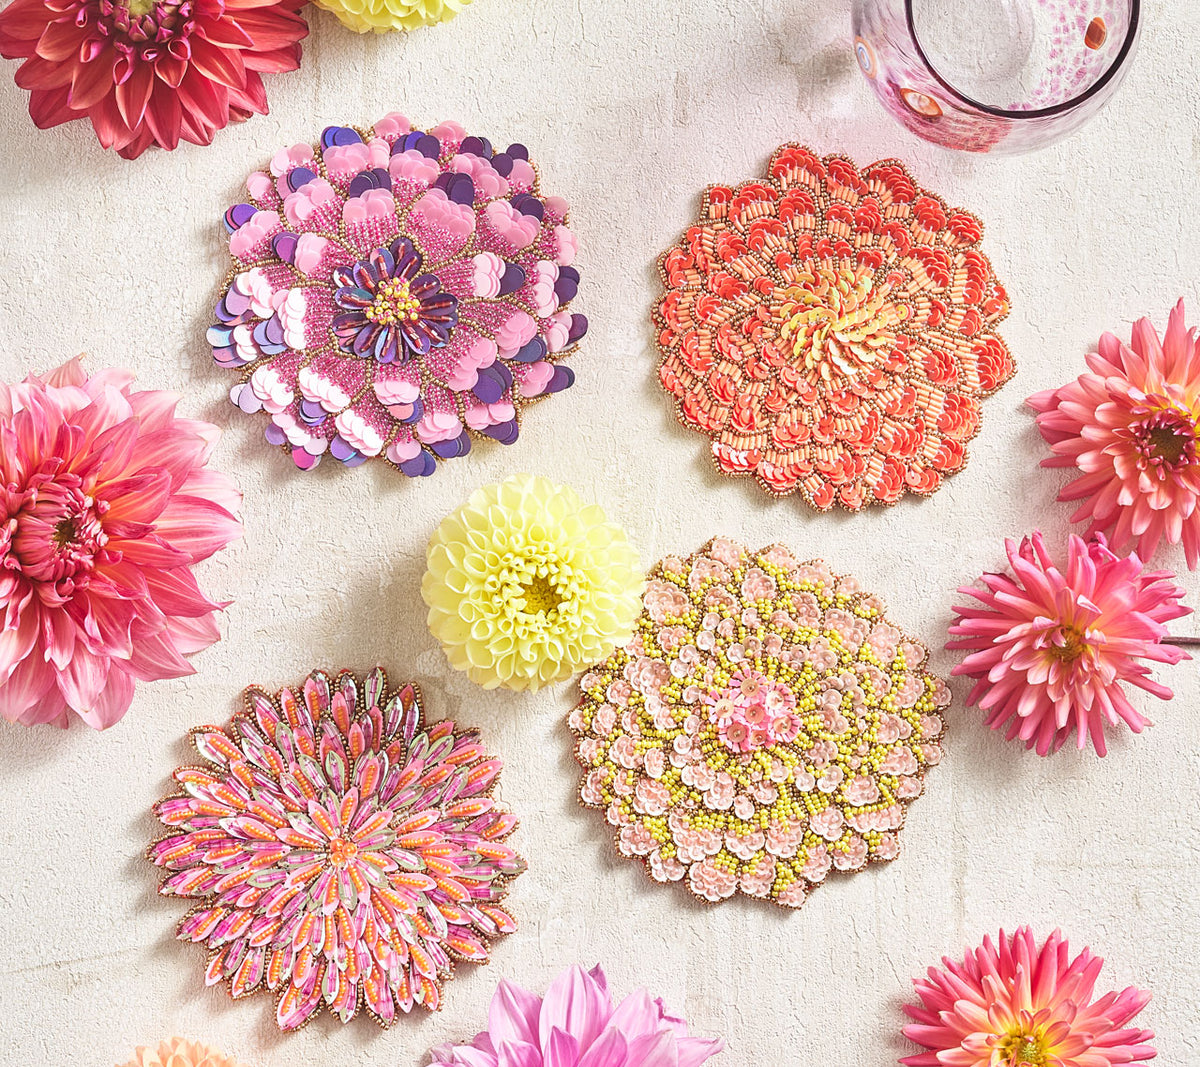 Kim Seybert Luxury Dahlia Drink Coasters mixed with flowers on a table